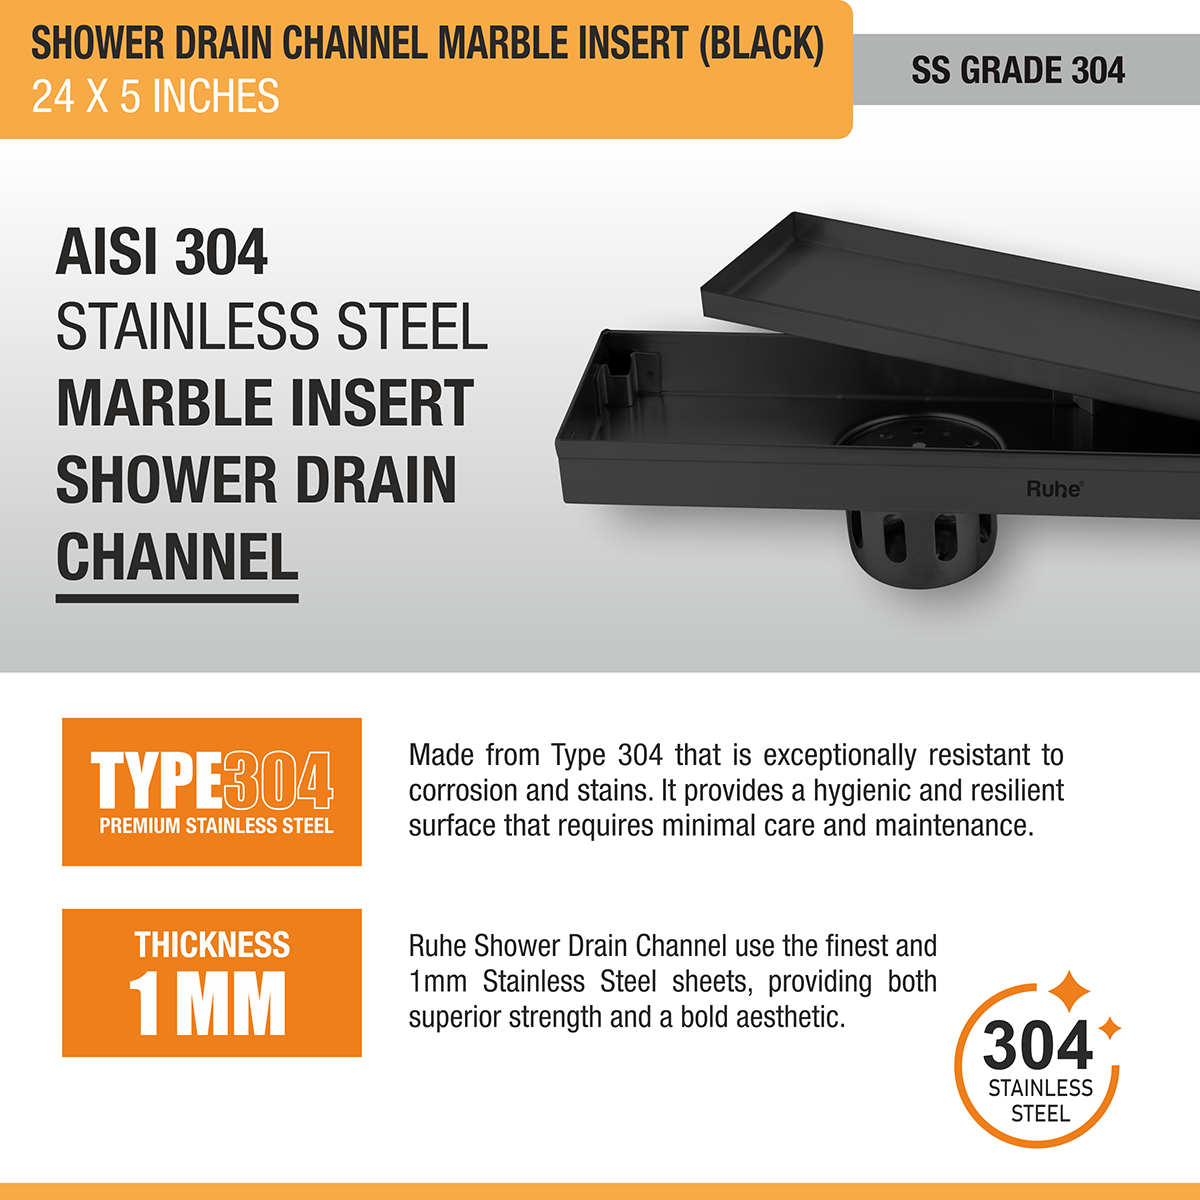 Marble Insert Shower Drain Channel (24 x 5 Inches) Black PVD Coated - by Ruhe®